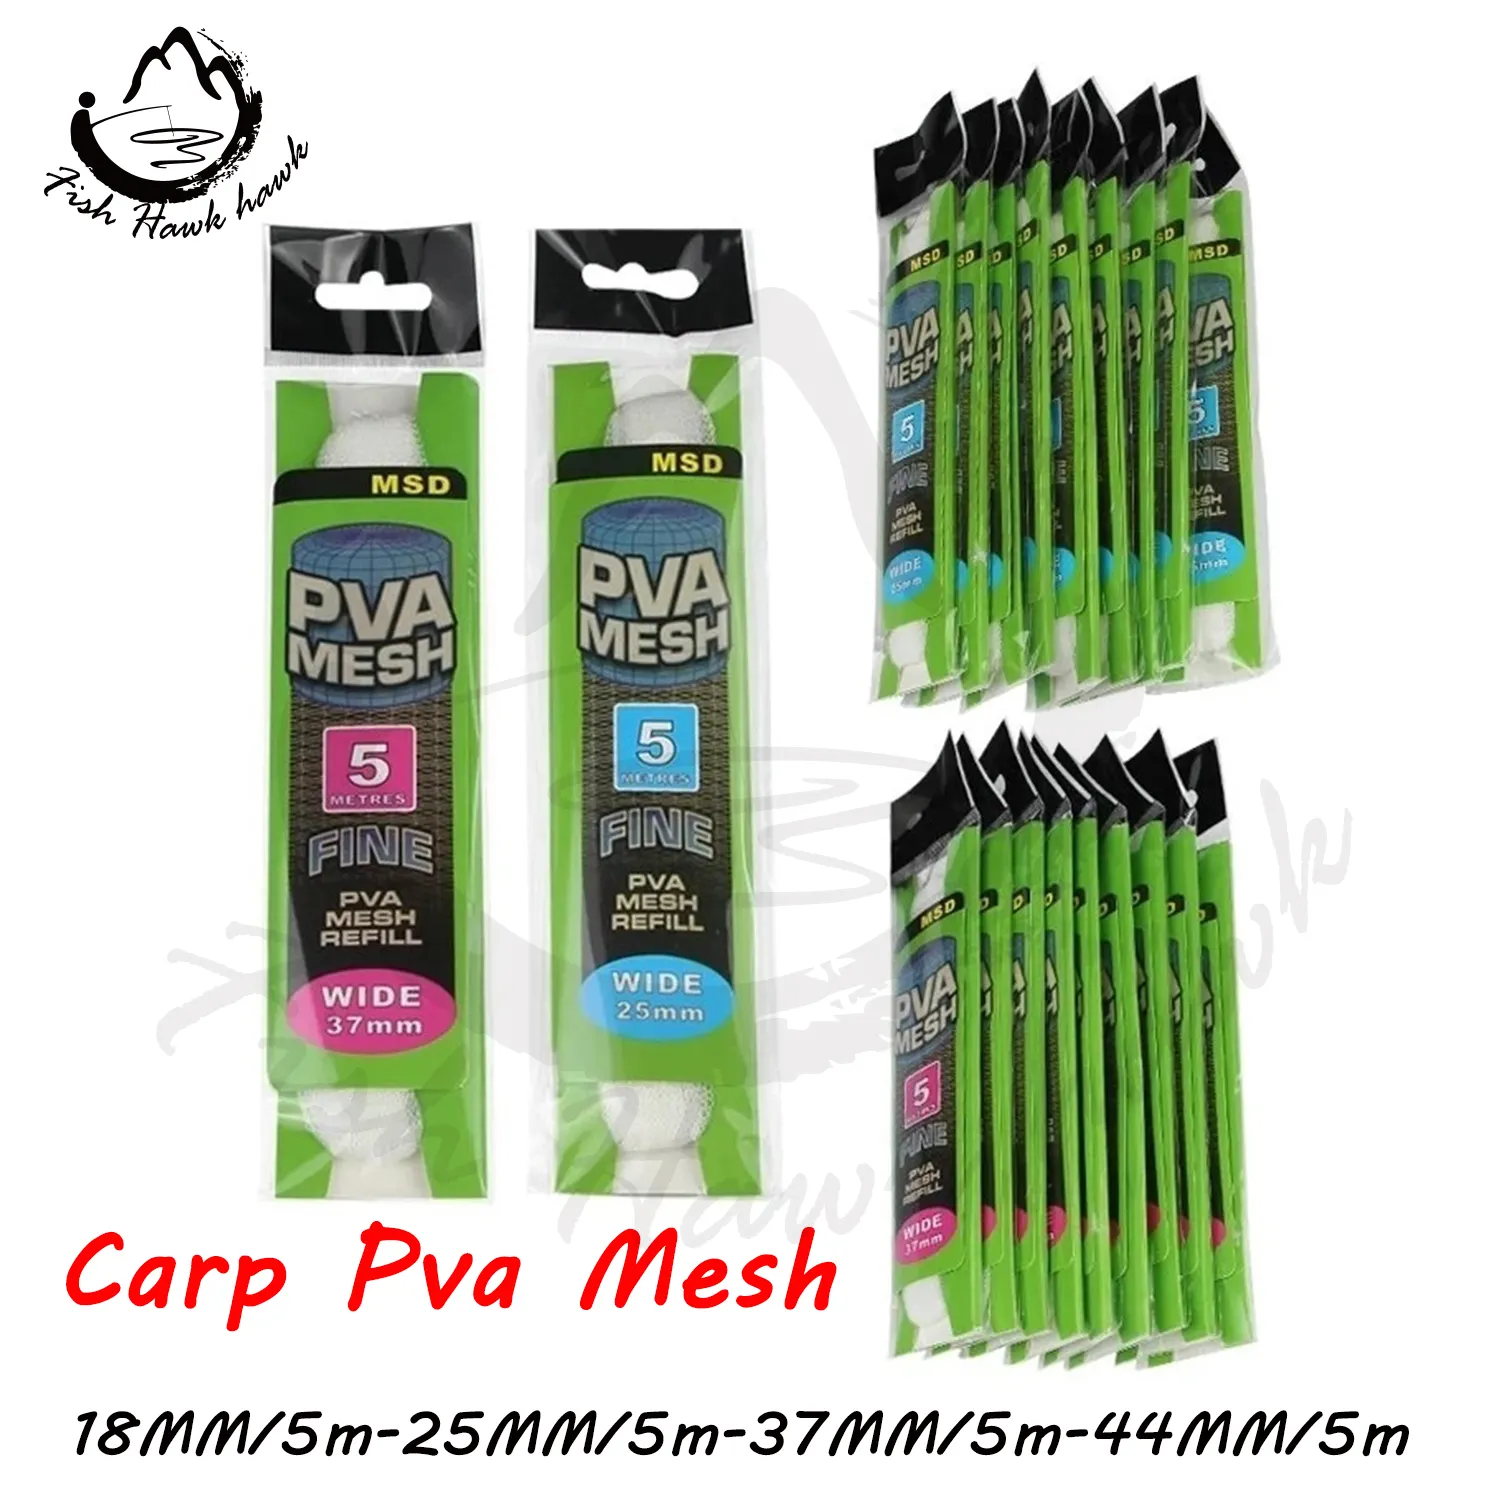 20 x PVA plunger stick 15mm trade pack 